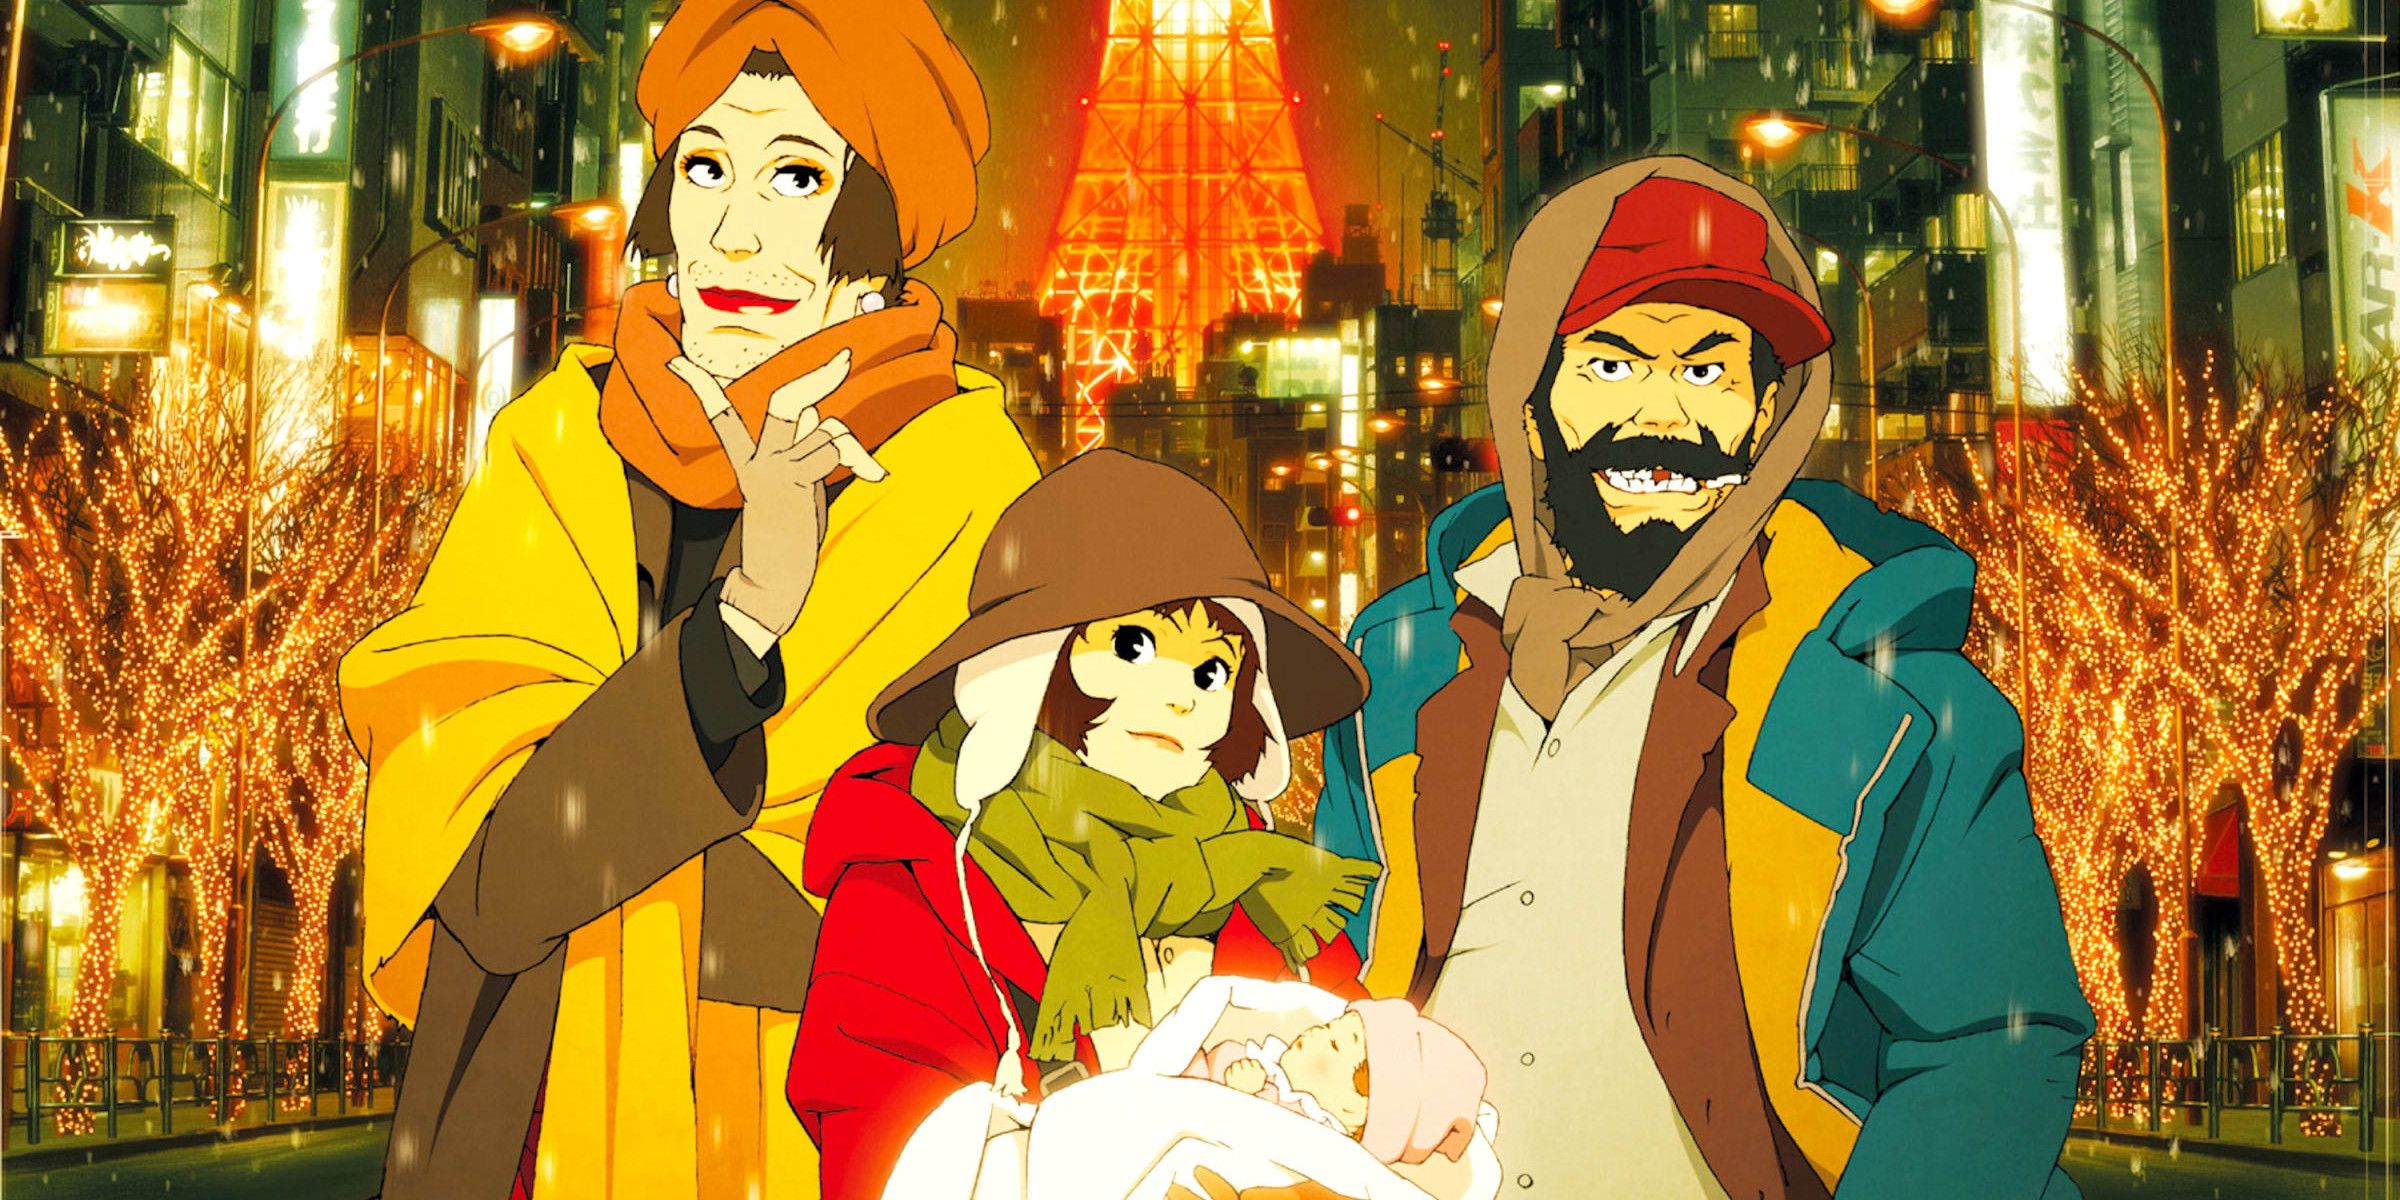 Promo image of Tokyo Godfathers showing the main characters standing together.